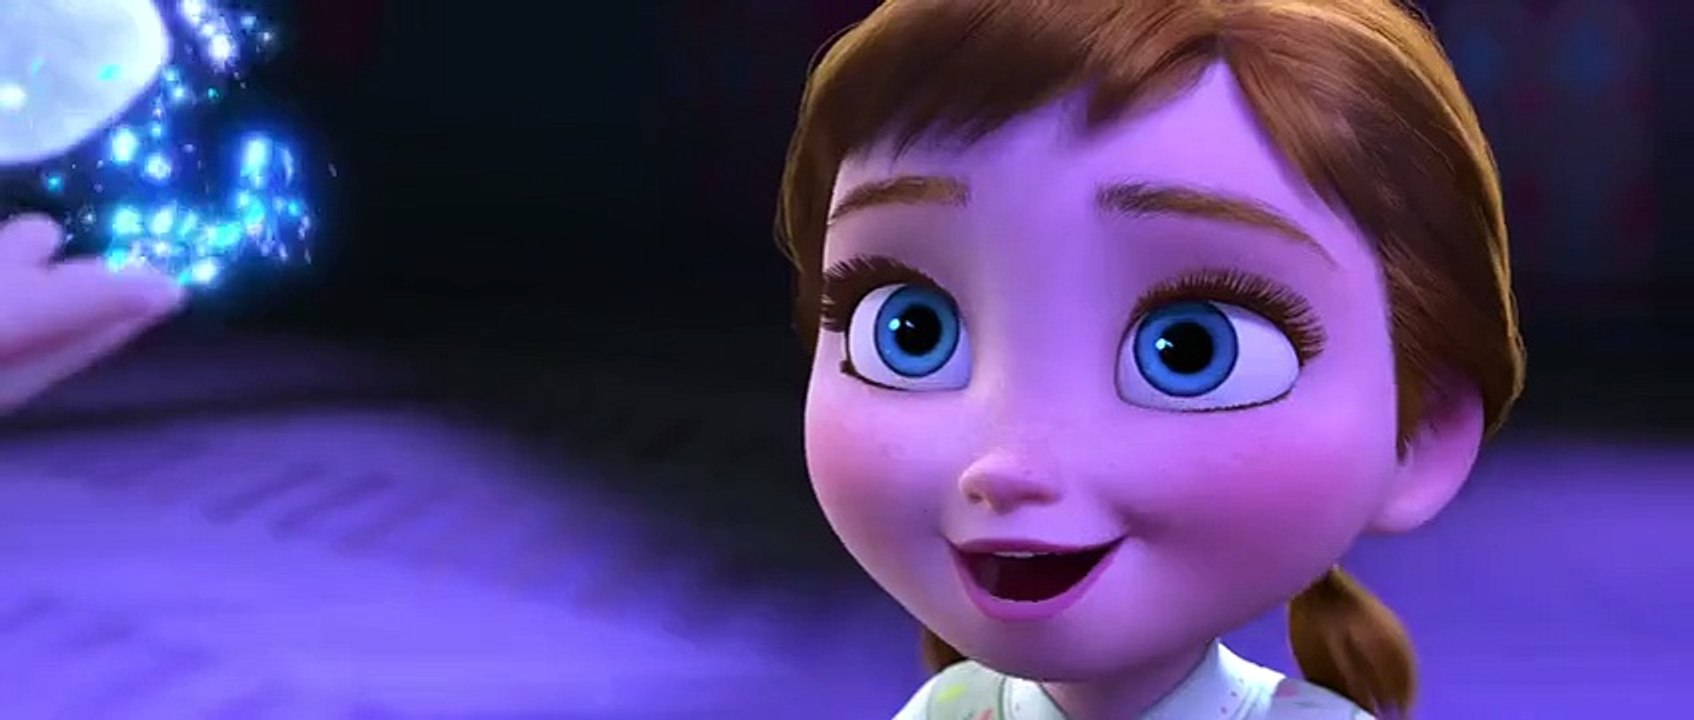 Frozen - P-2 - Full Movie - Hd Video - video Dailymotion